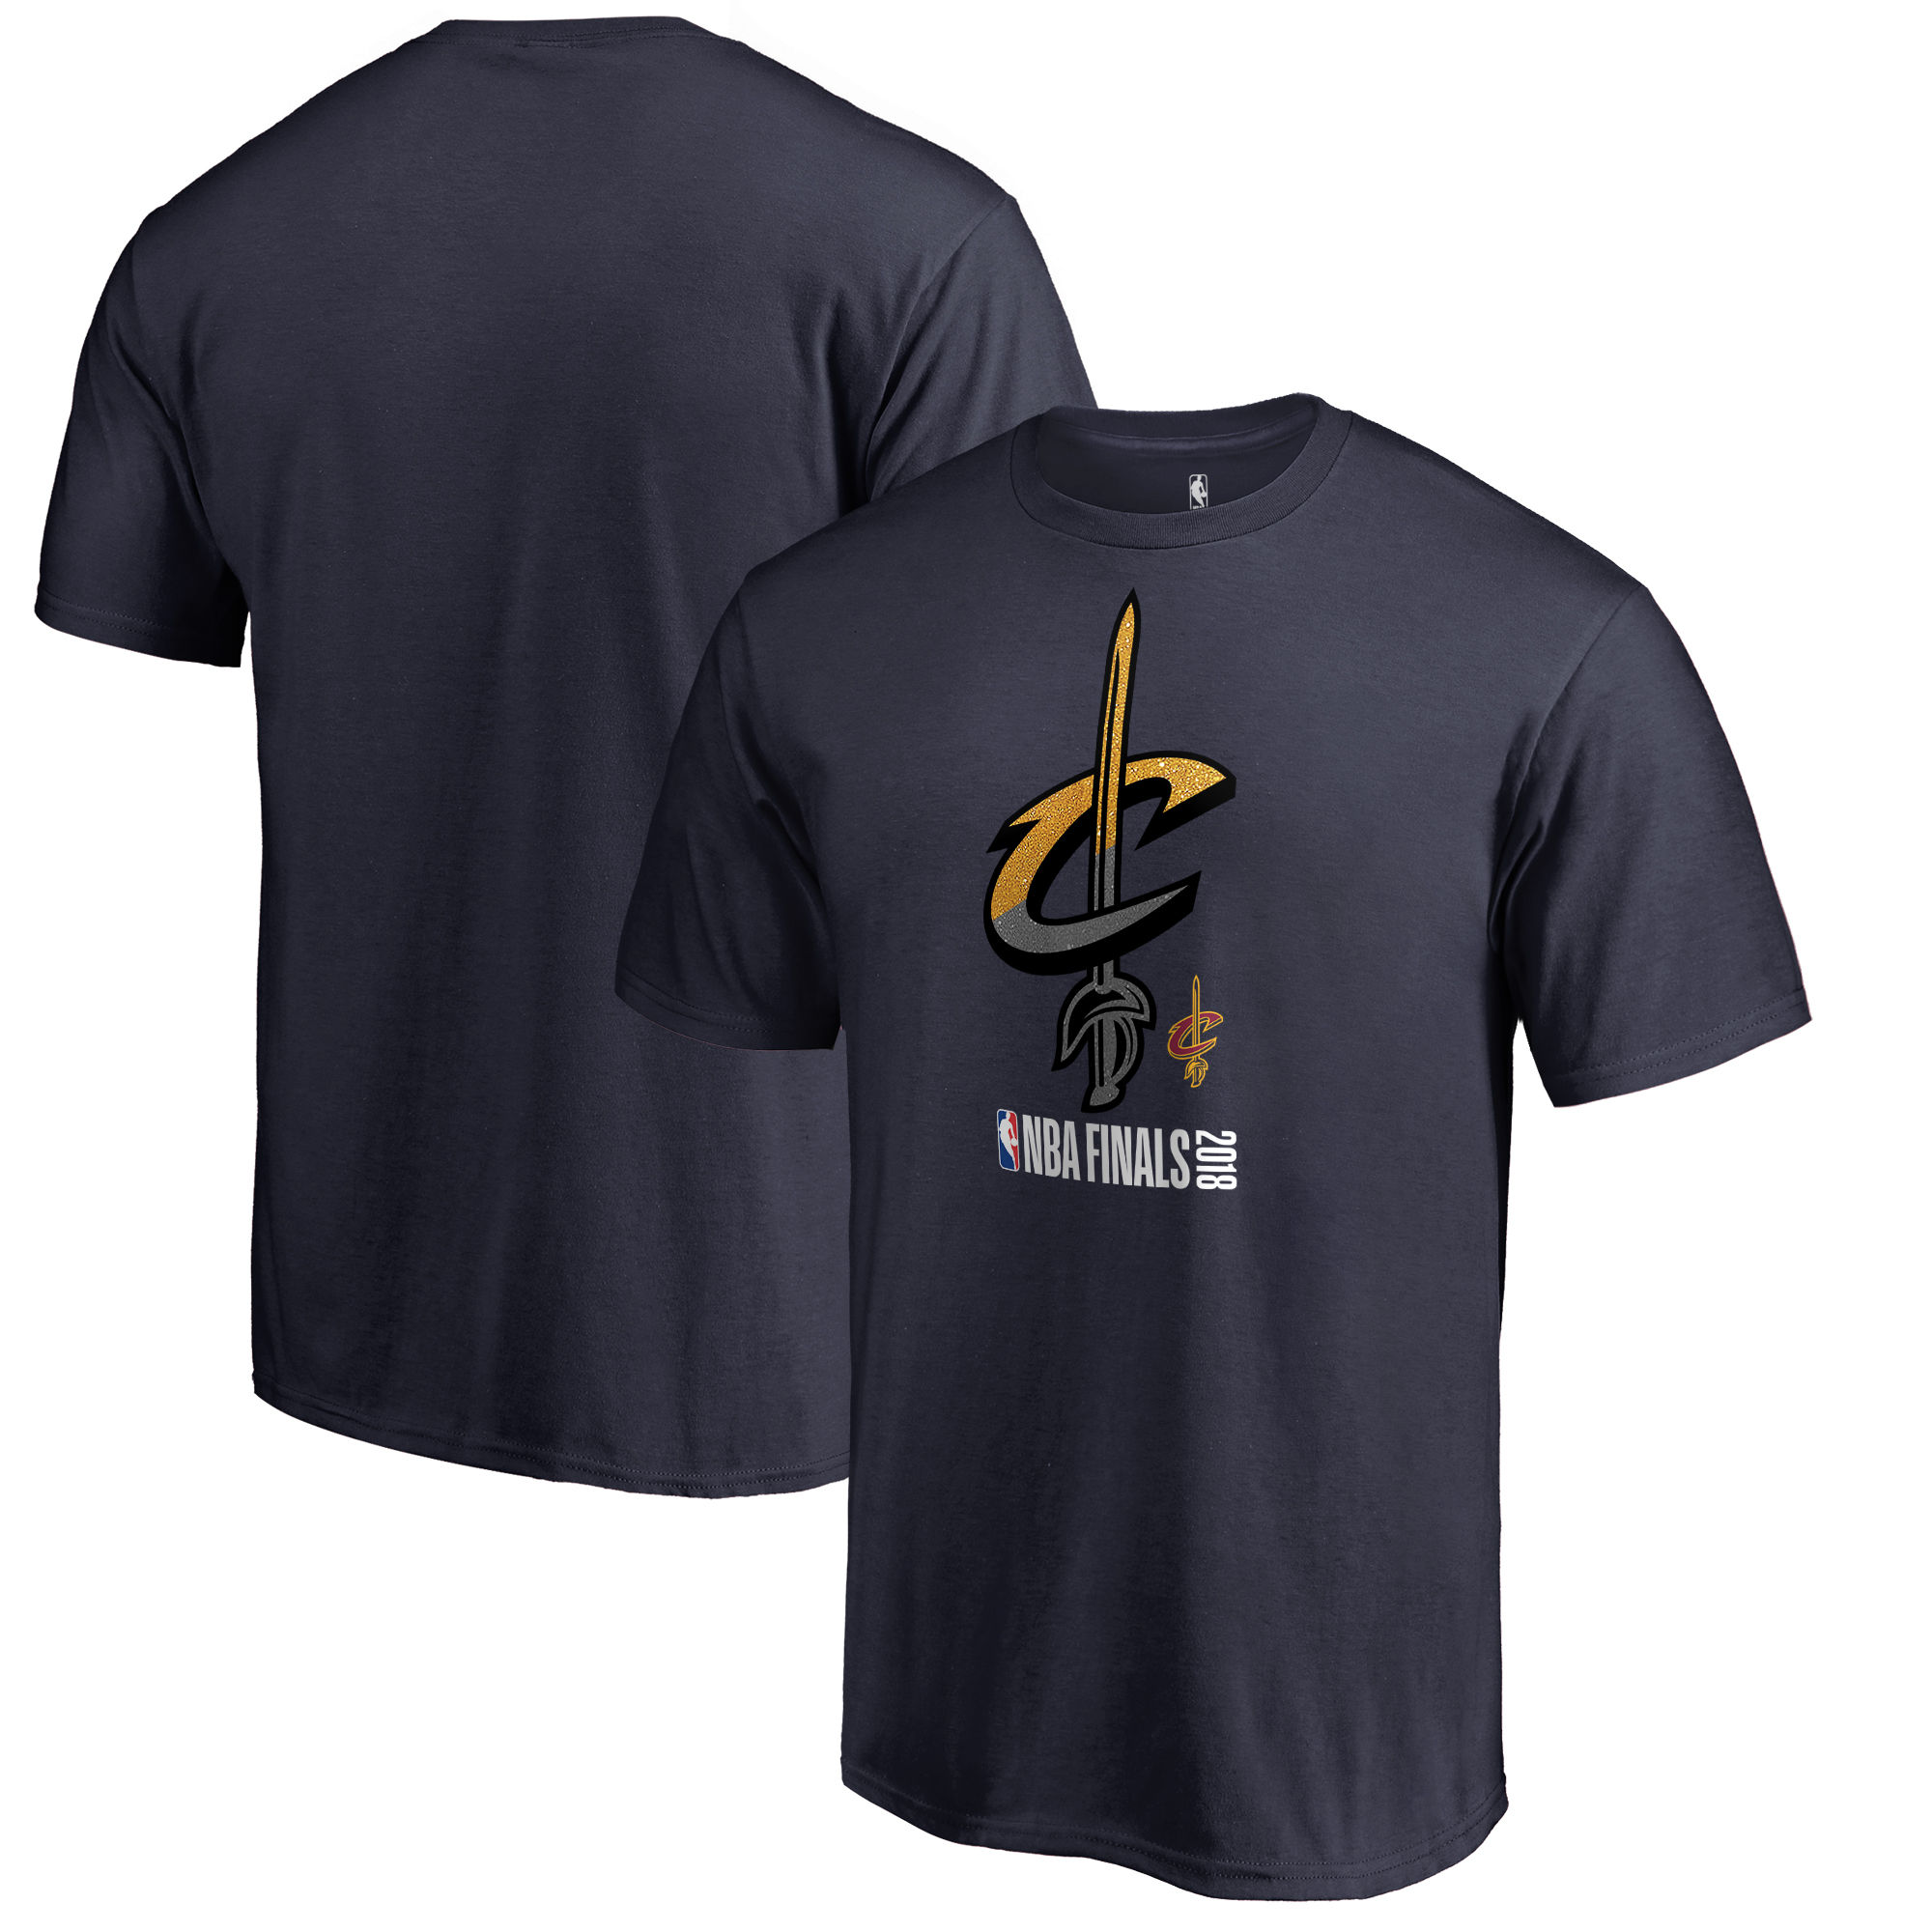 Cleveland Cavaliers Fanatics Branded 2018 Eastern Conference Champions Extended Run T-Shirt Navy